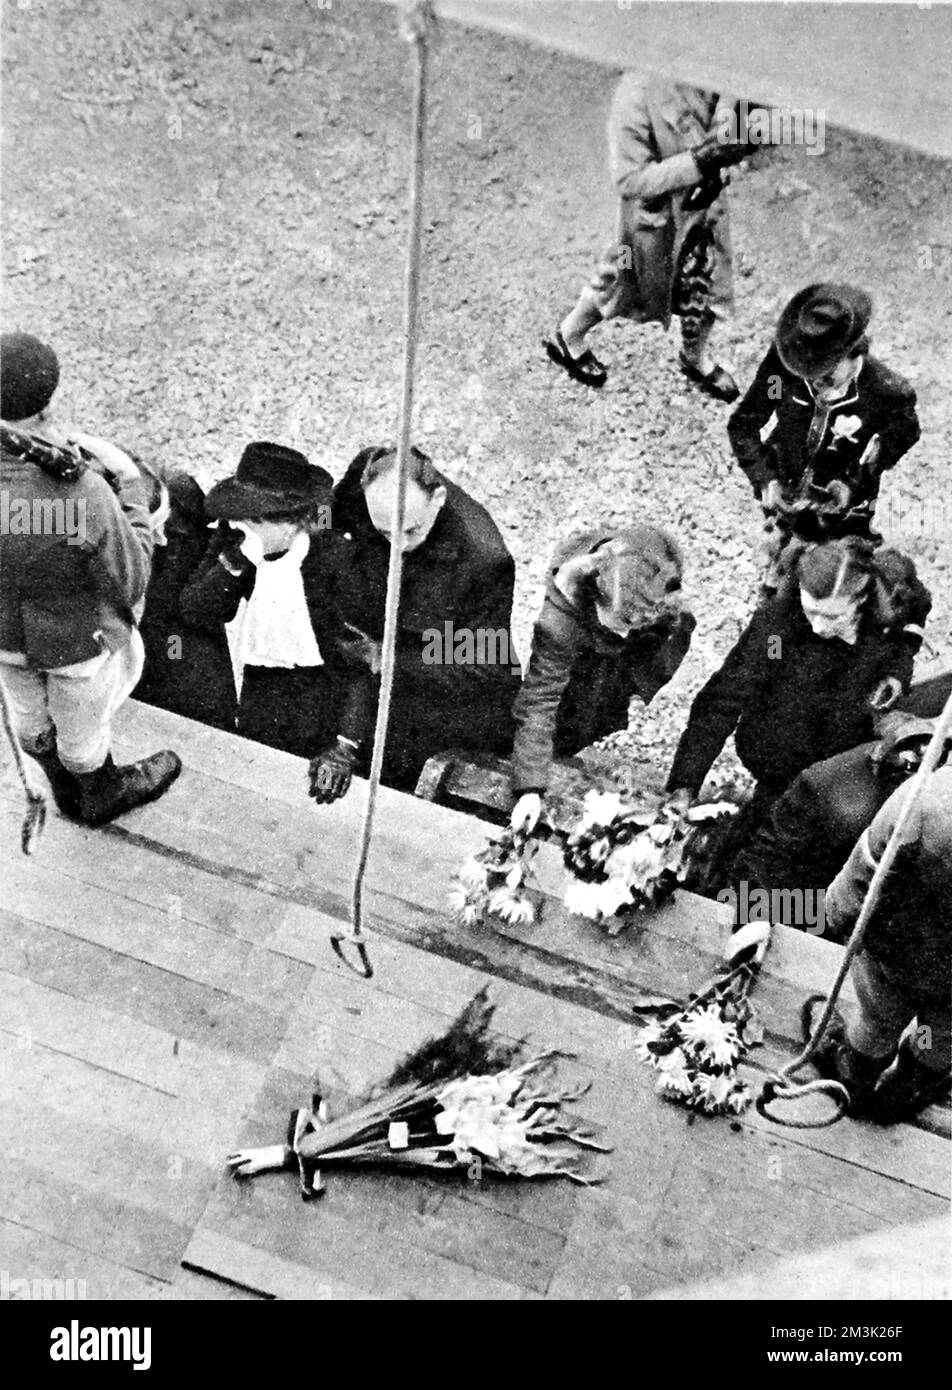 Photograph showing Dutch civilians laying flowers on the gallows at Breendonck fort, Belgium, 1944.    This fort, situated between Brussels and Antwerp, was used by Nazi security services during their occupation of Belgium between 1940-44.  As such, it was the scene of many Nazi atrocities; the gallows shown had a long drop, designed to slowly strangle victims to death.     Date: 1944 Stock Photo